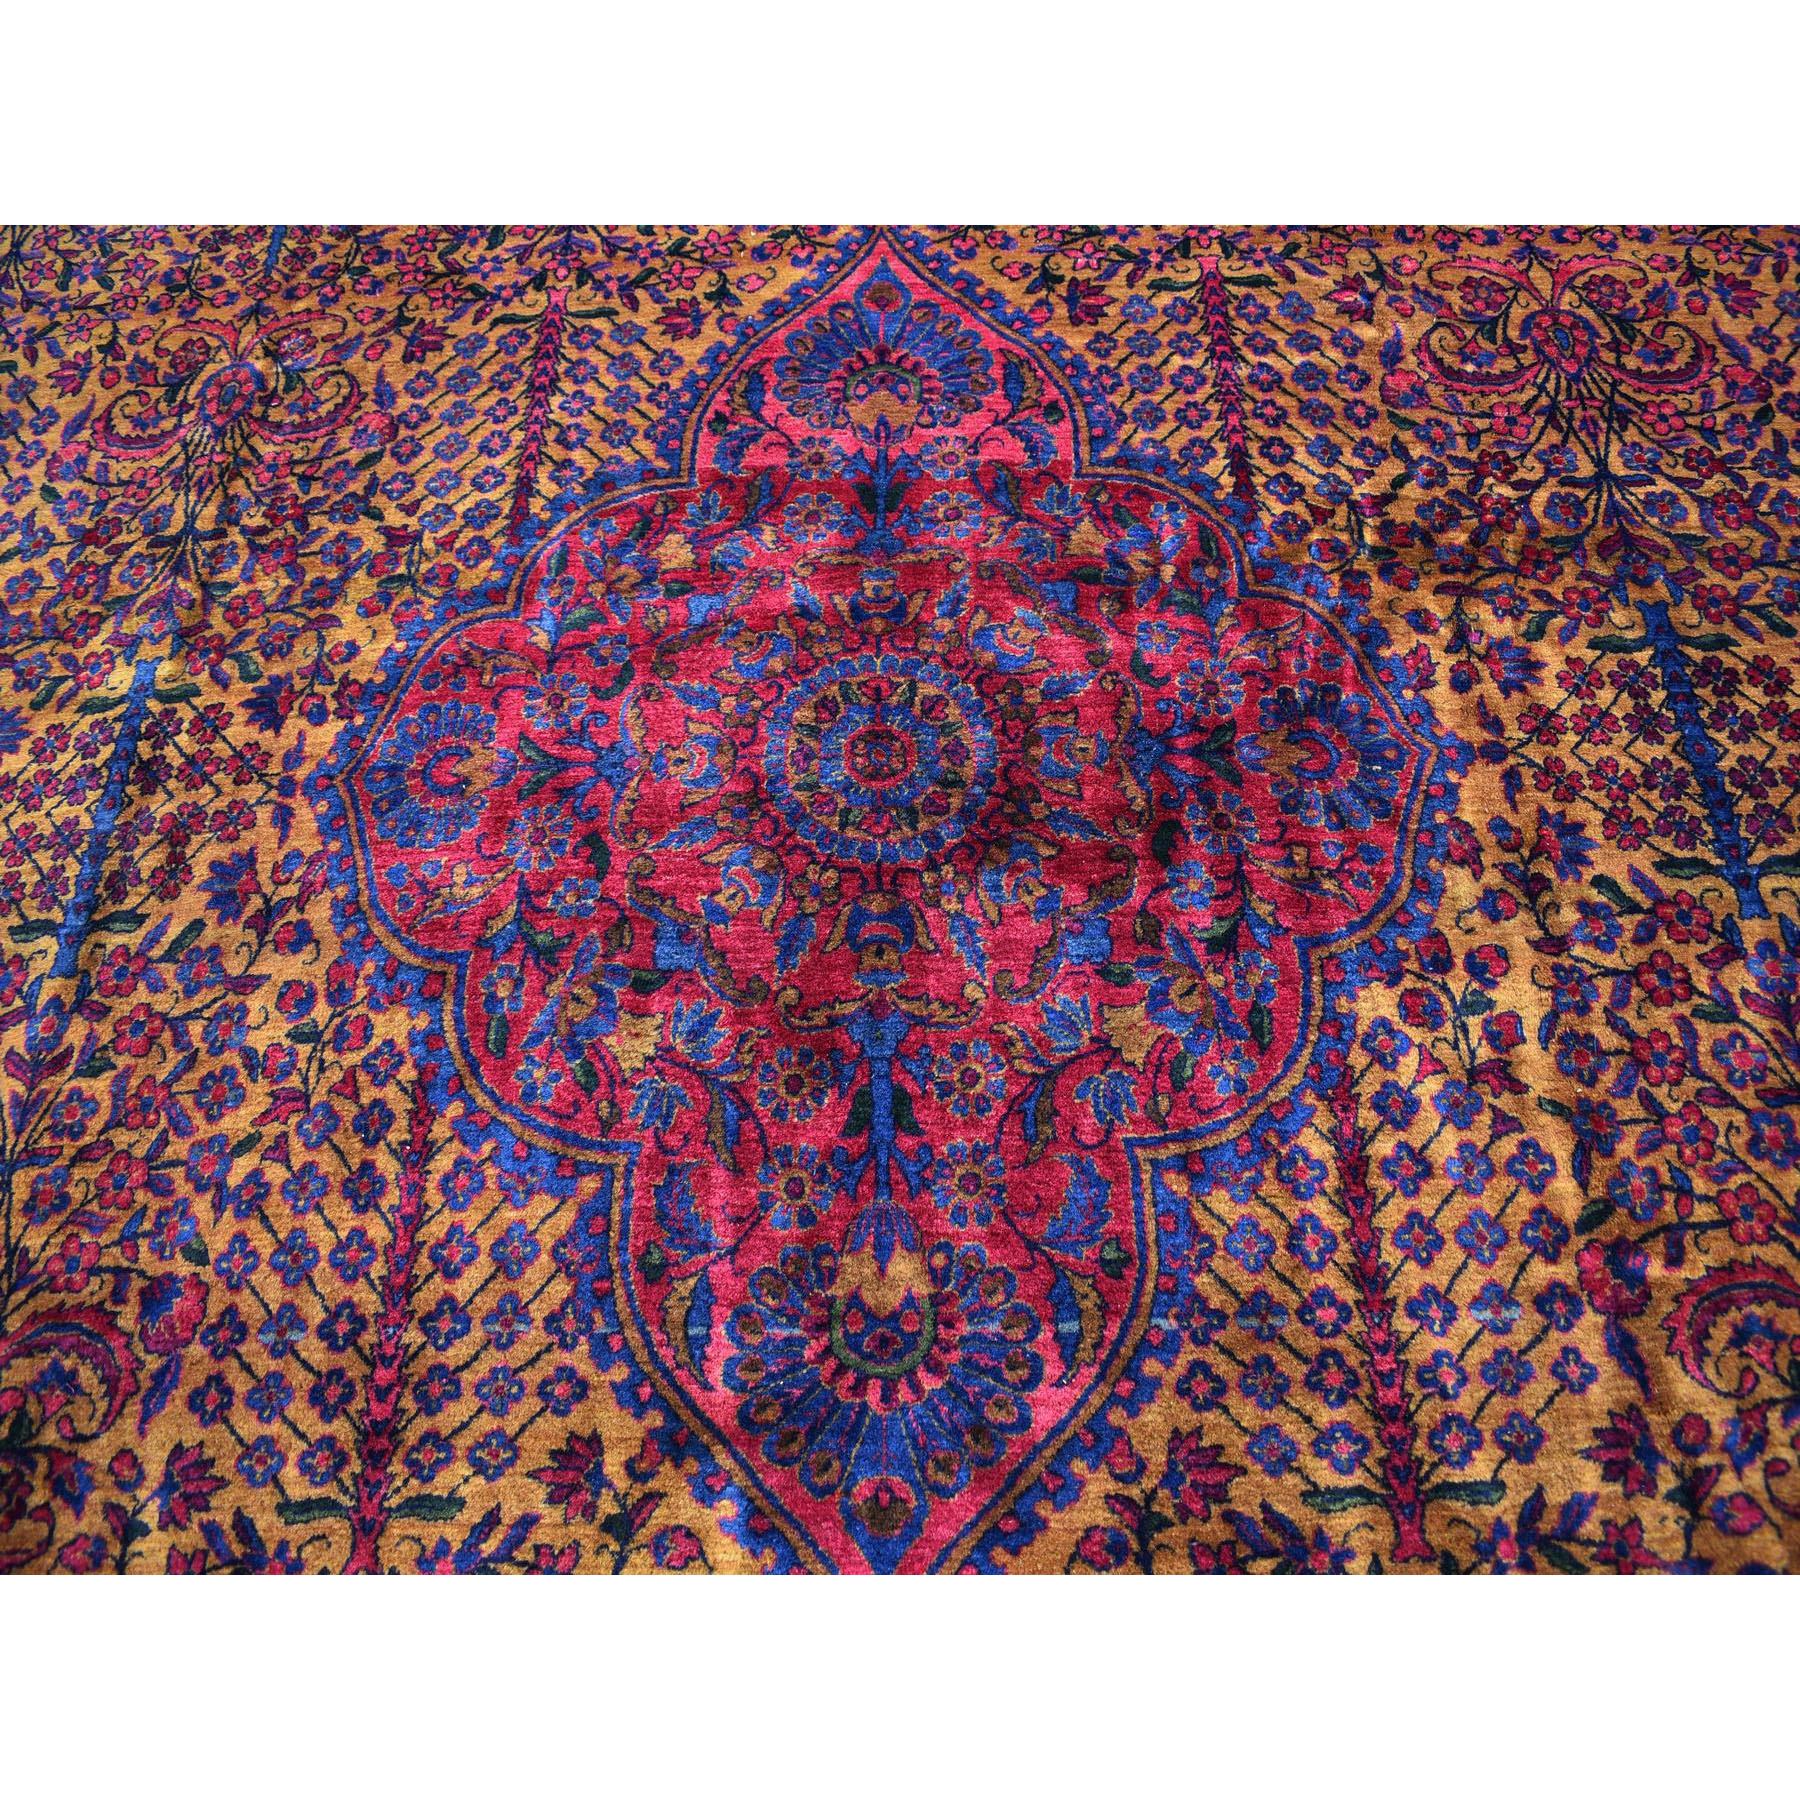 11-4 x14-9  Oversized Gold Antique Taftanjian Sarouk Signed Full Pile Clean & Soft Exc Cond Pure wool Oriental Rug 